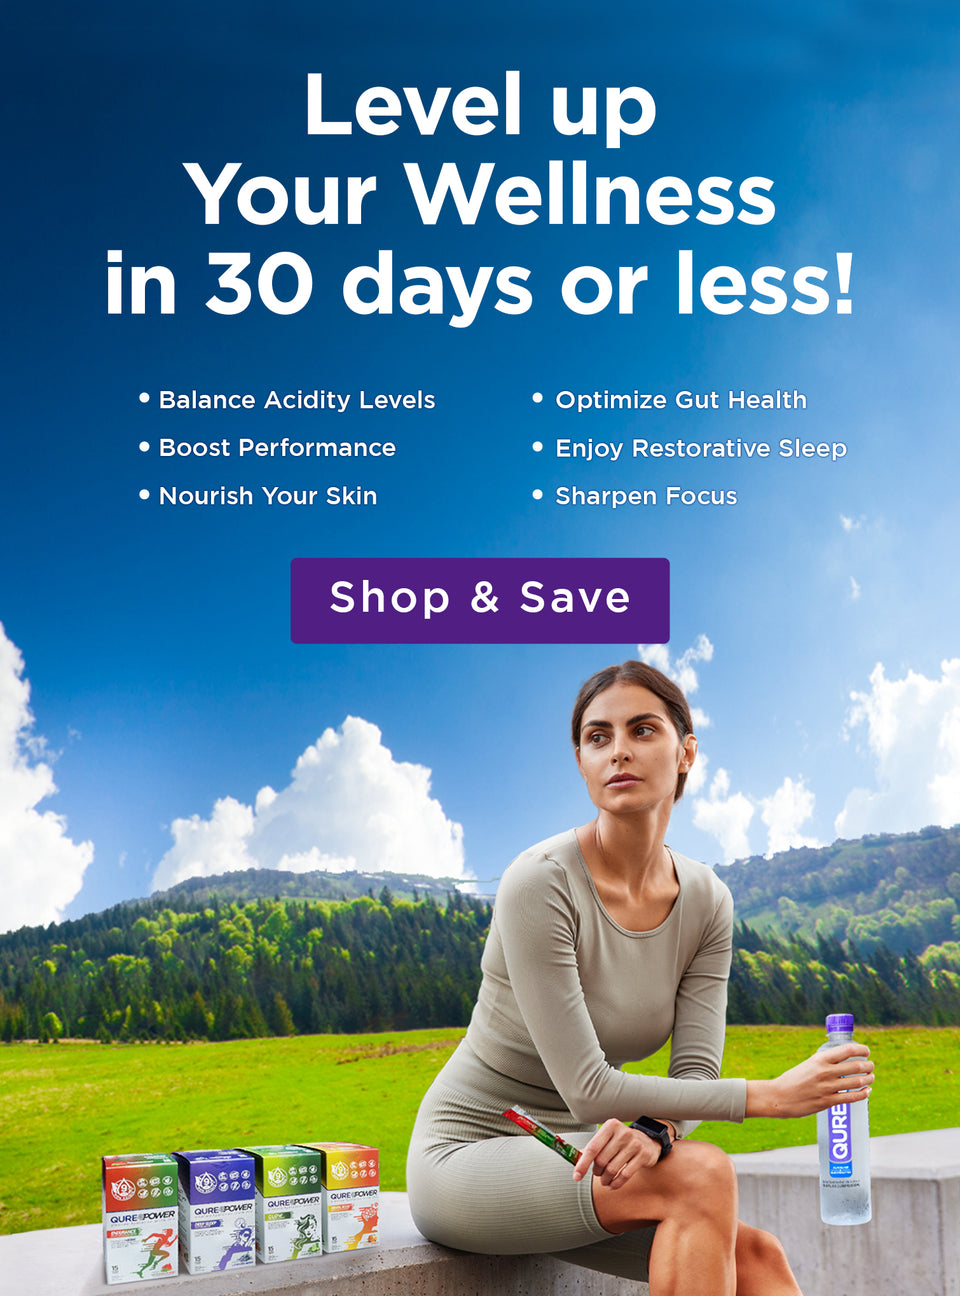  Level up your wellness in 30 days or less